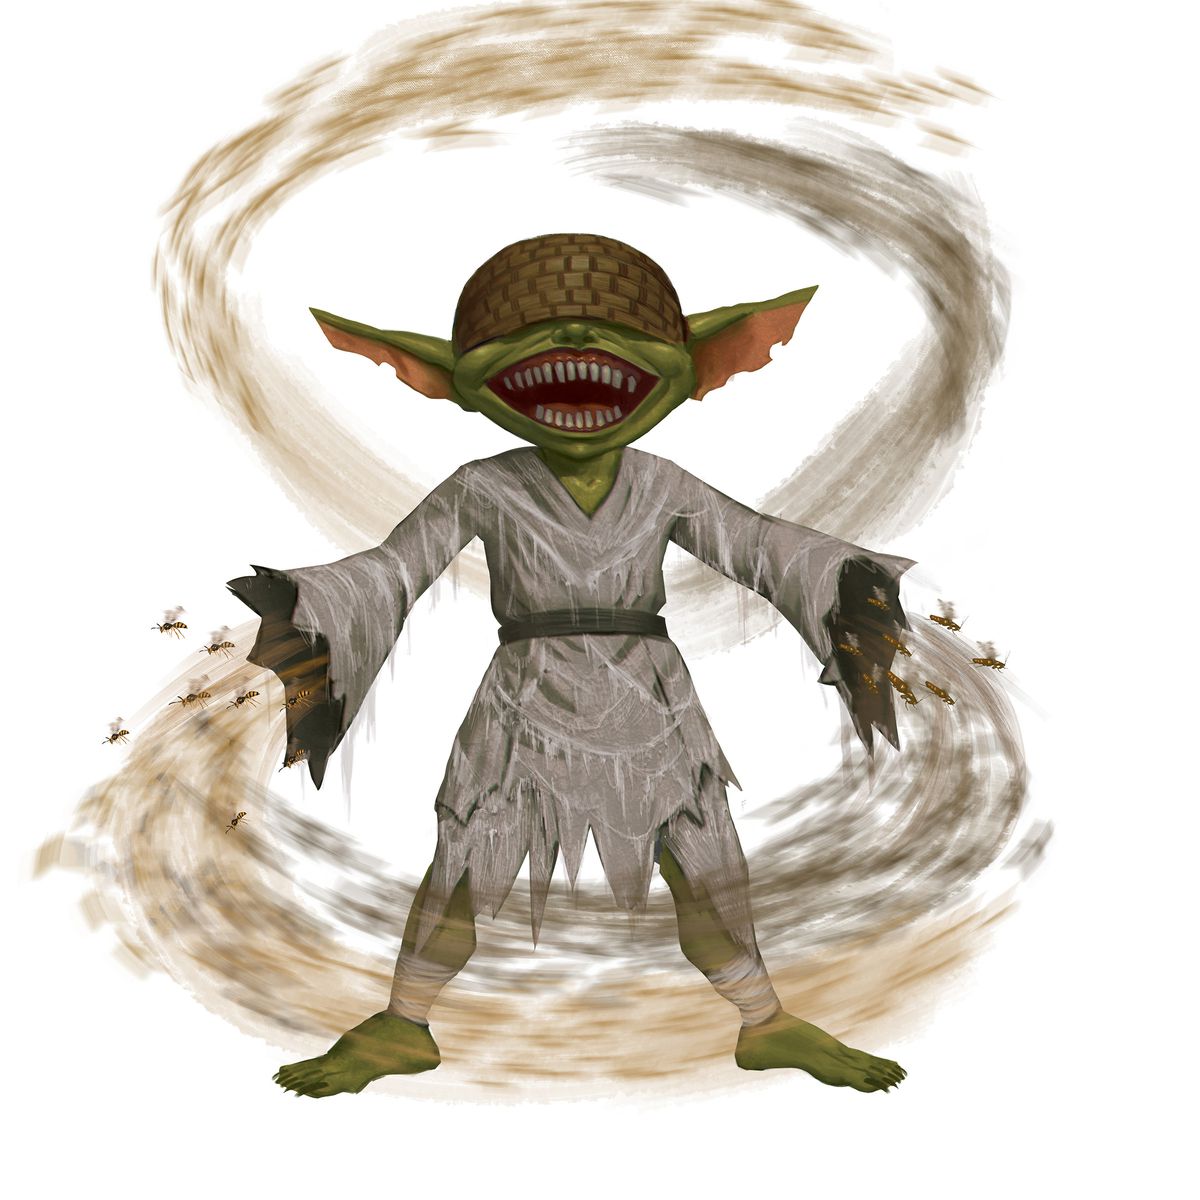 A goblin wearing a mask inspired by medieval beekeepers — with wicker bands over its eyes — calls forth a swarm of insects from beneath its tattered robes.